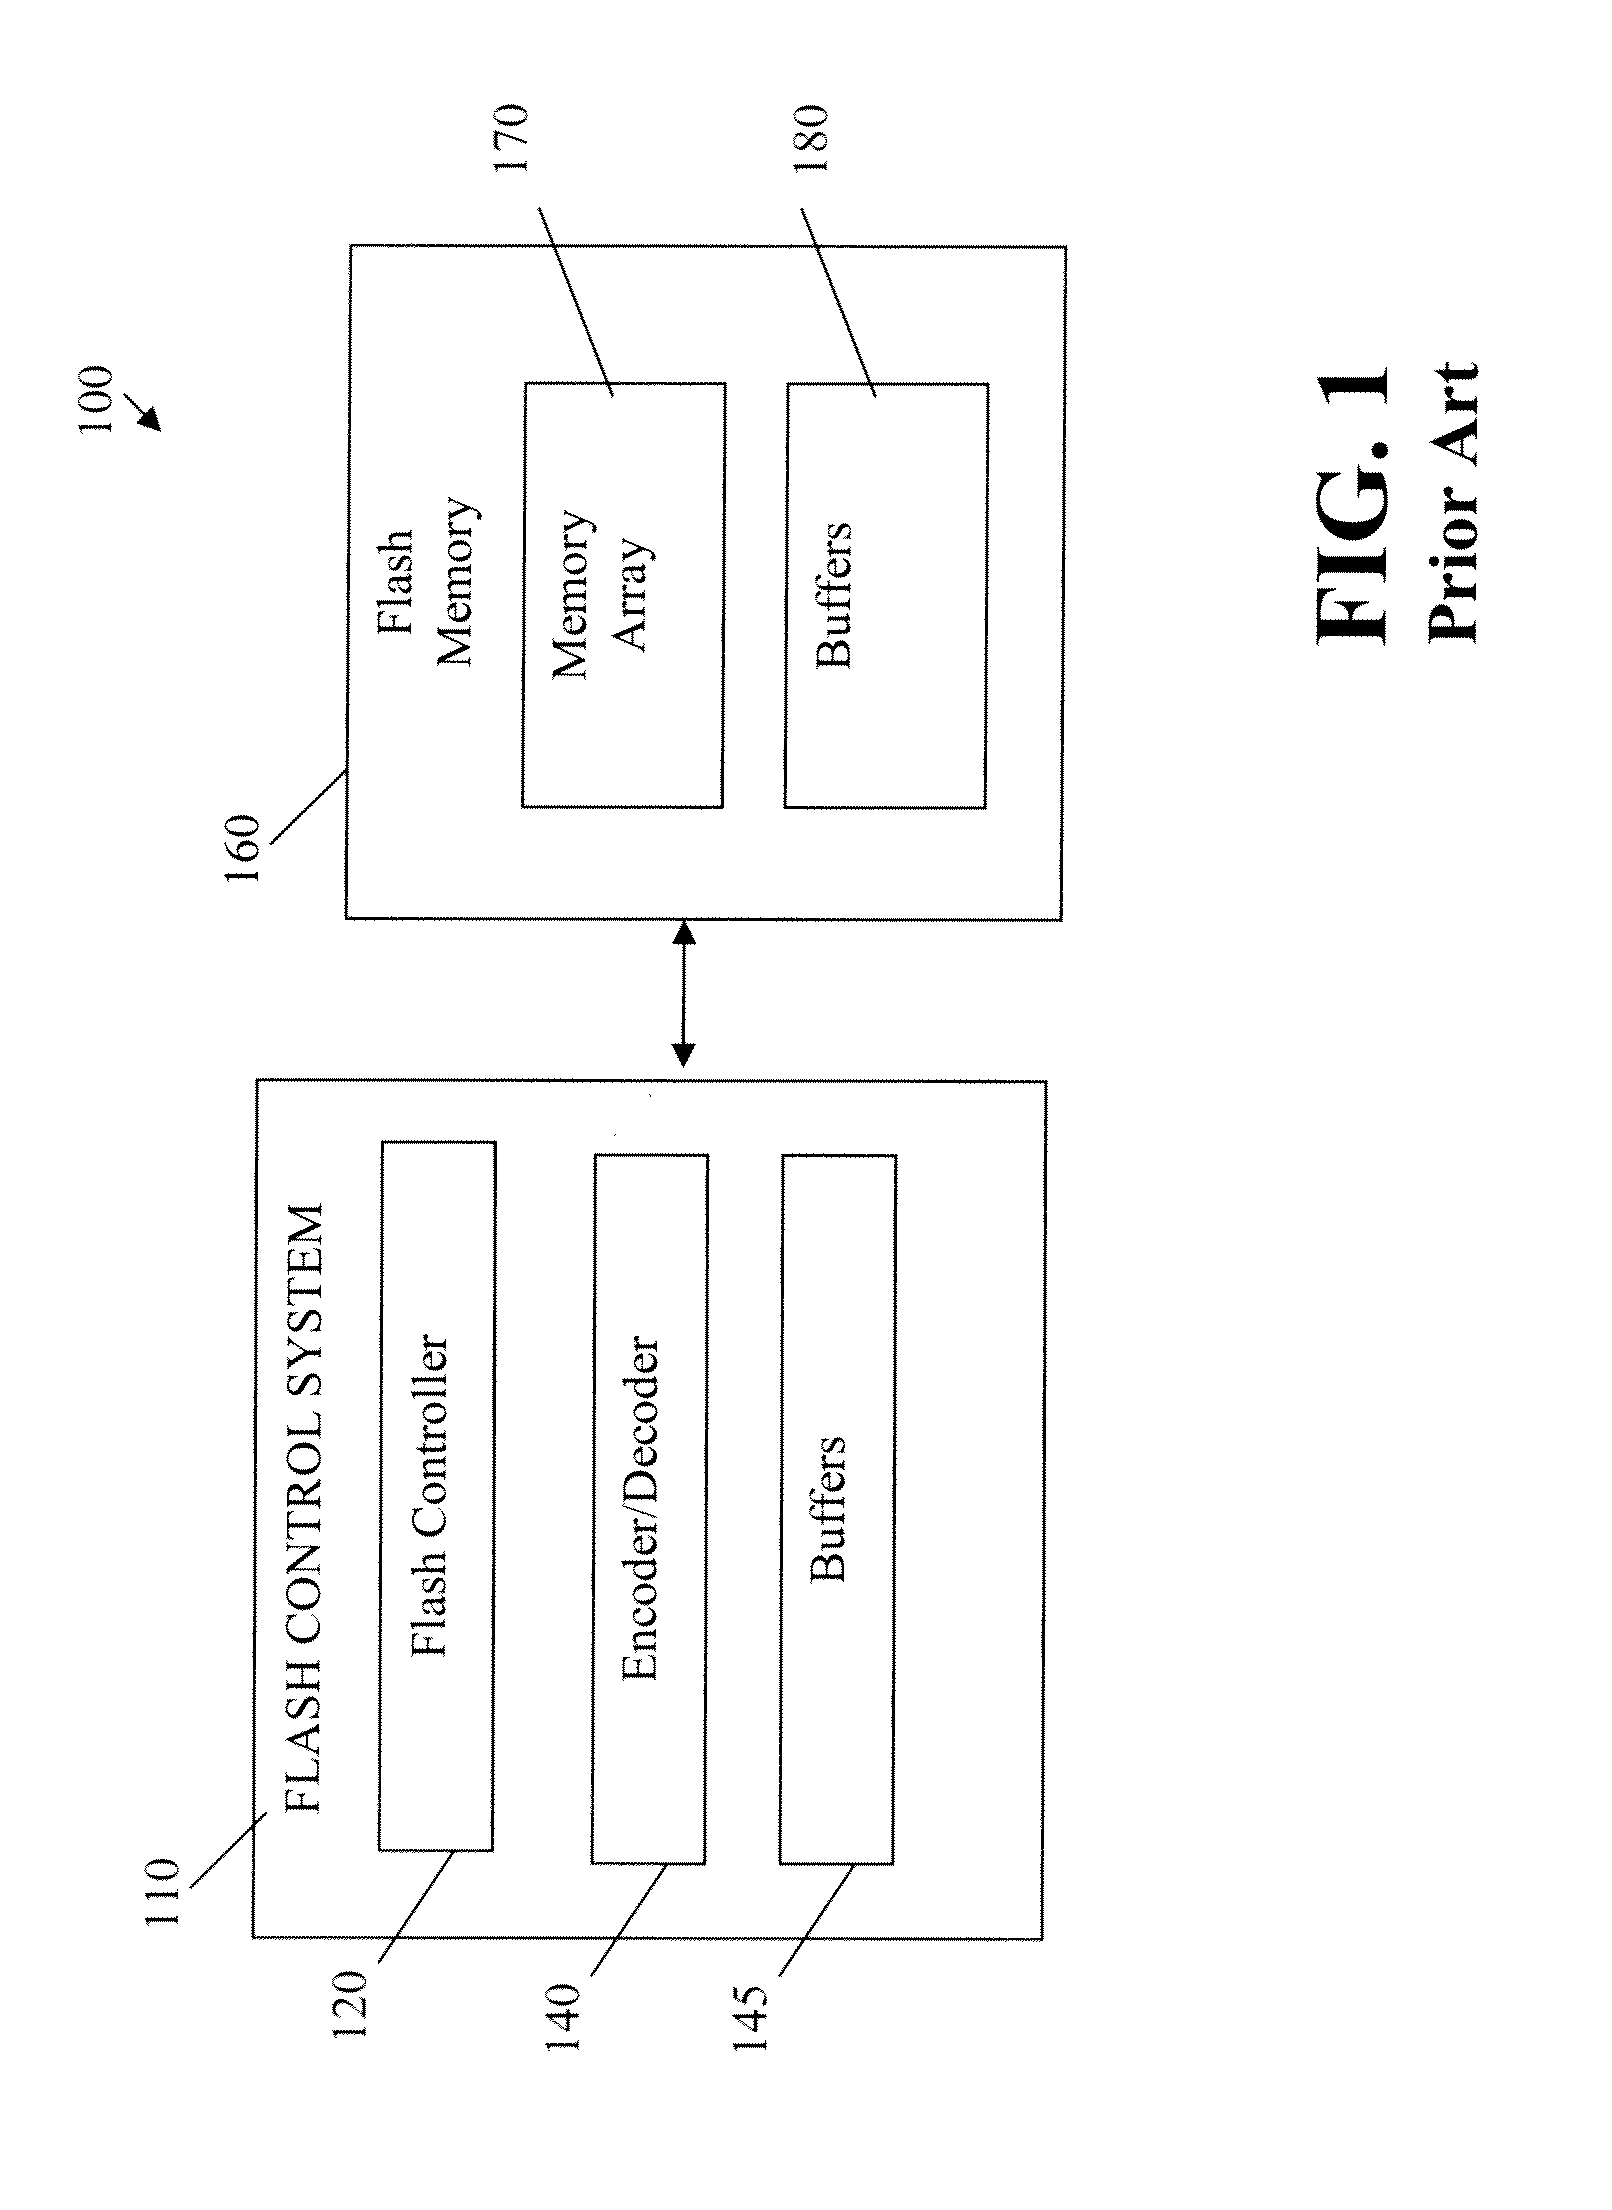 Methods and apparatus for approximating a probability density function or distribution for a received value in communication or storage systems